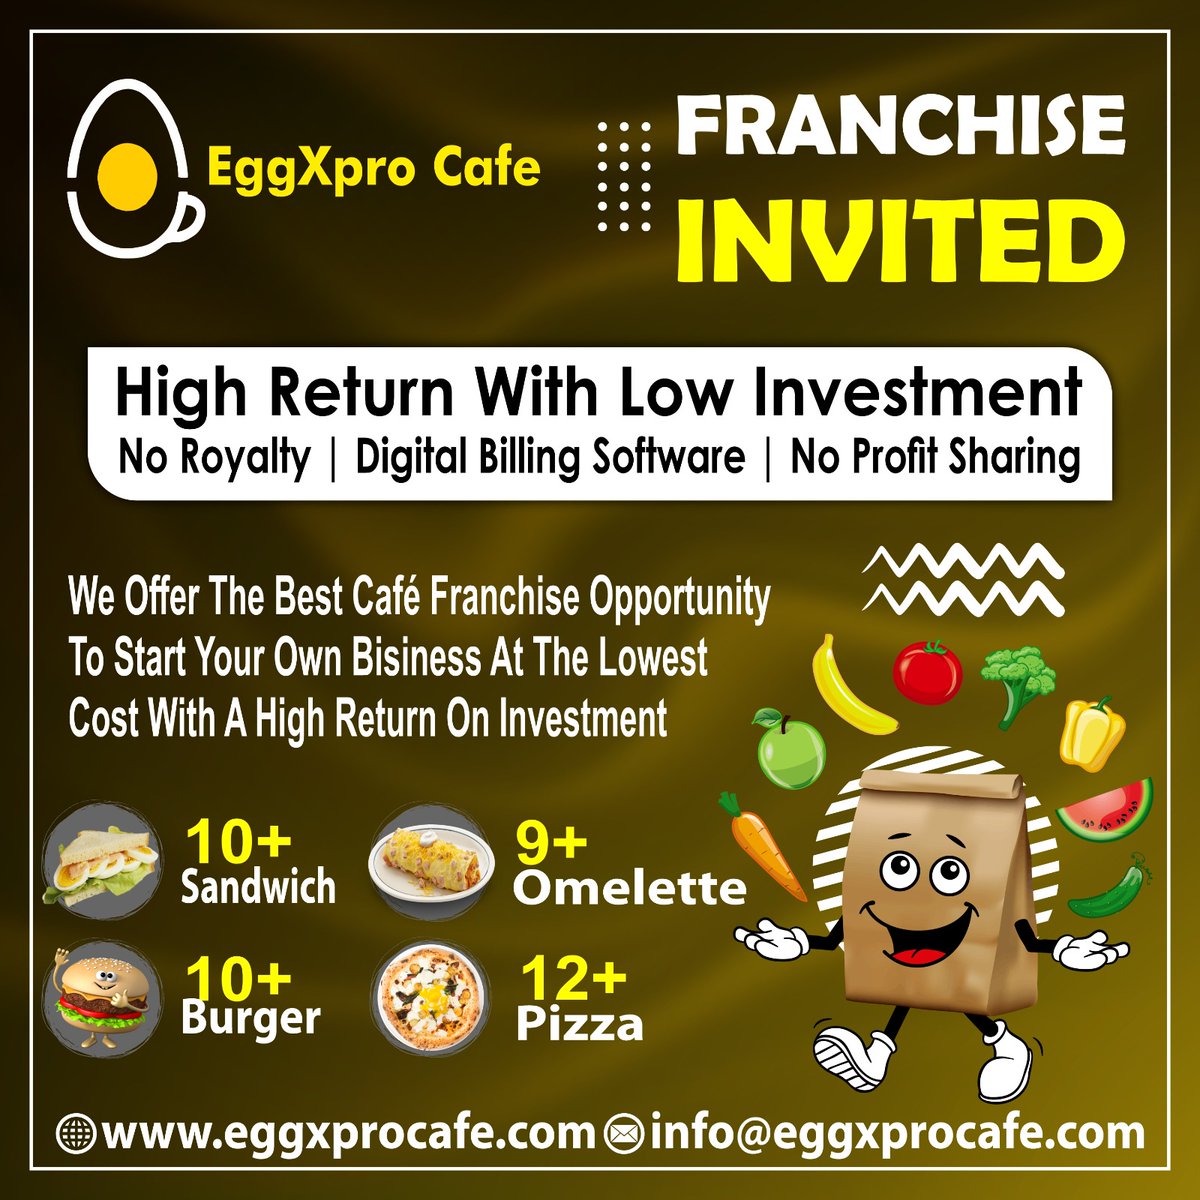 Eggs Food Franchise Brand is one of the most innovative and profitable egg food franchise in India, that produces very unique dishes.
.
#eggxprocafe #foodindustry #franchisees #restaurantbusiness #HighROI #HighProfit #franchiseowner #foodfranchise #restaurant #eggdishes #eggfood